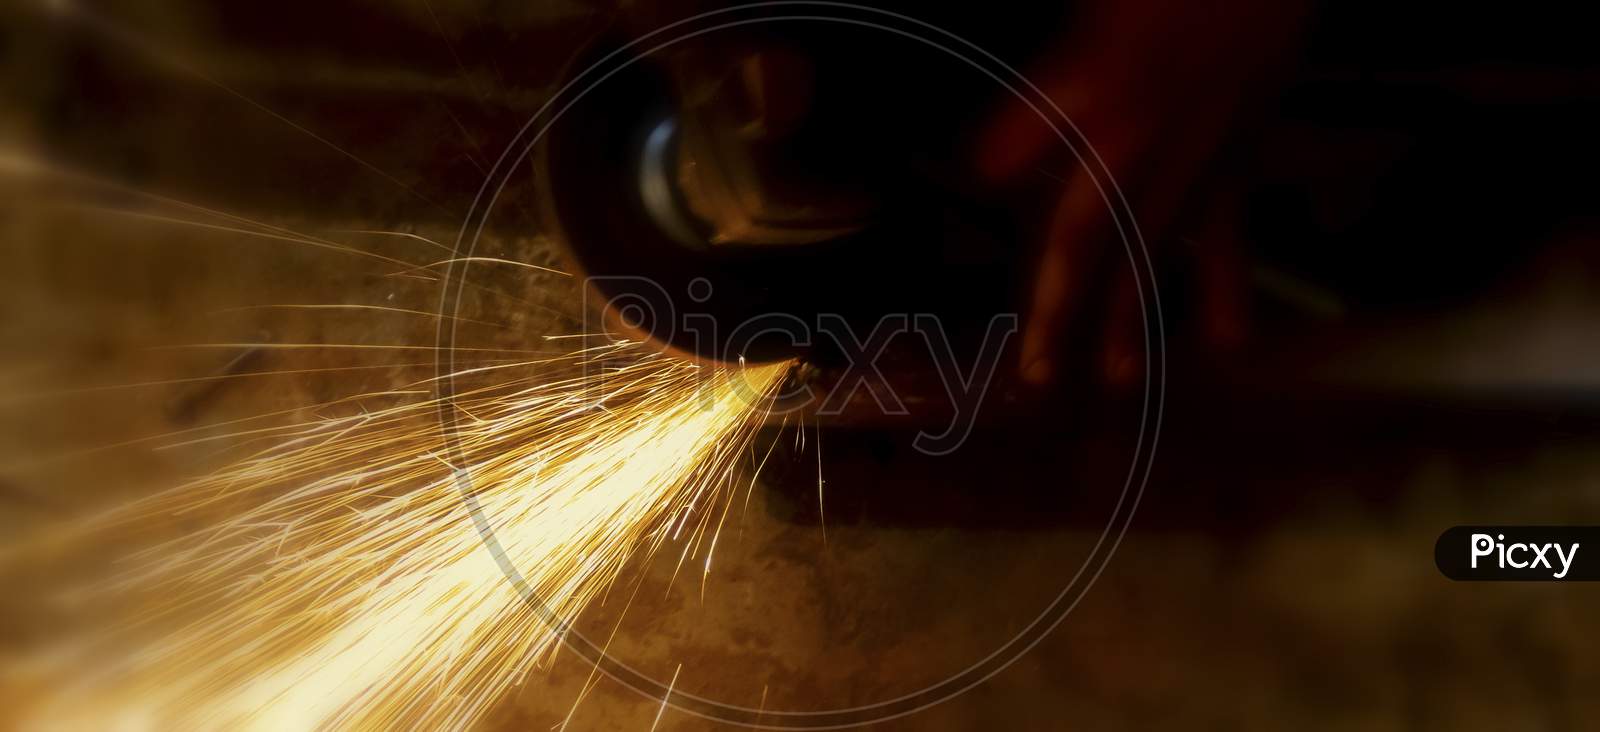 Electric Wheel Grinding On Steel Structure In Factory. Sparks From The Grinding Wheel.Selective Focus With Blurry Background.